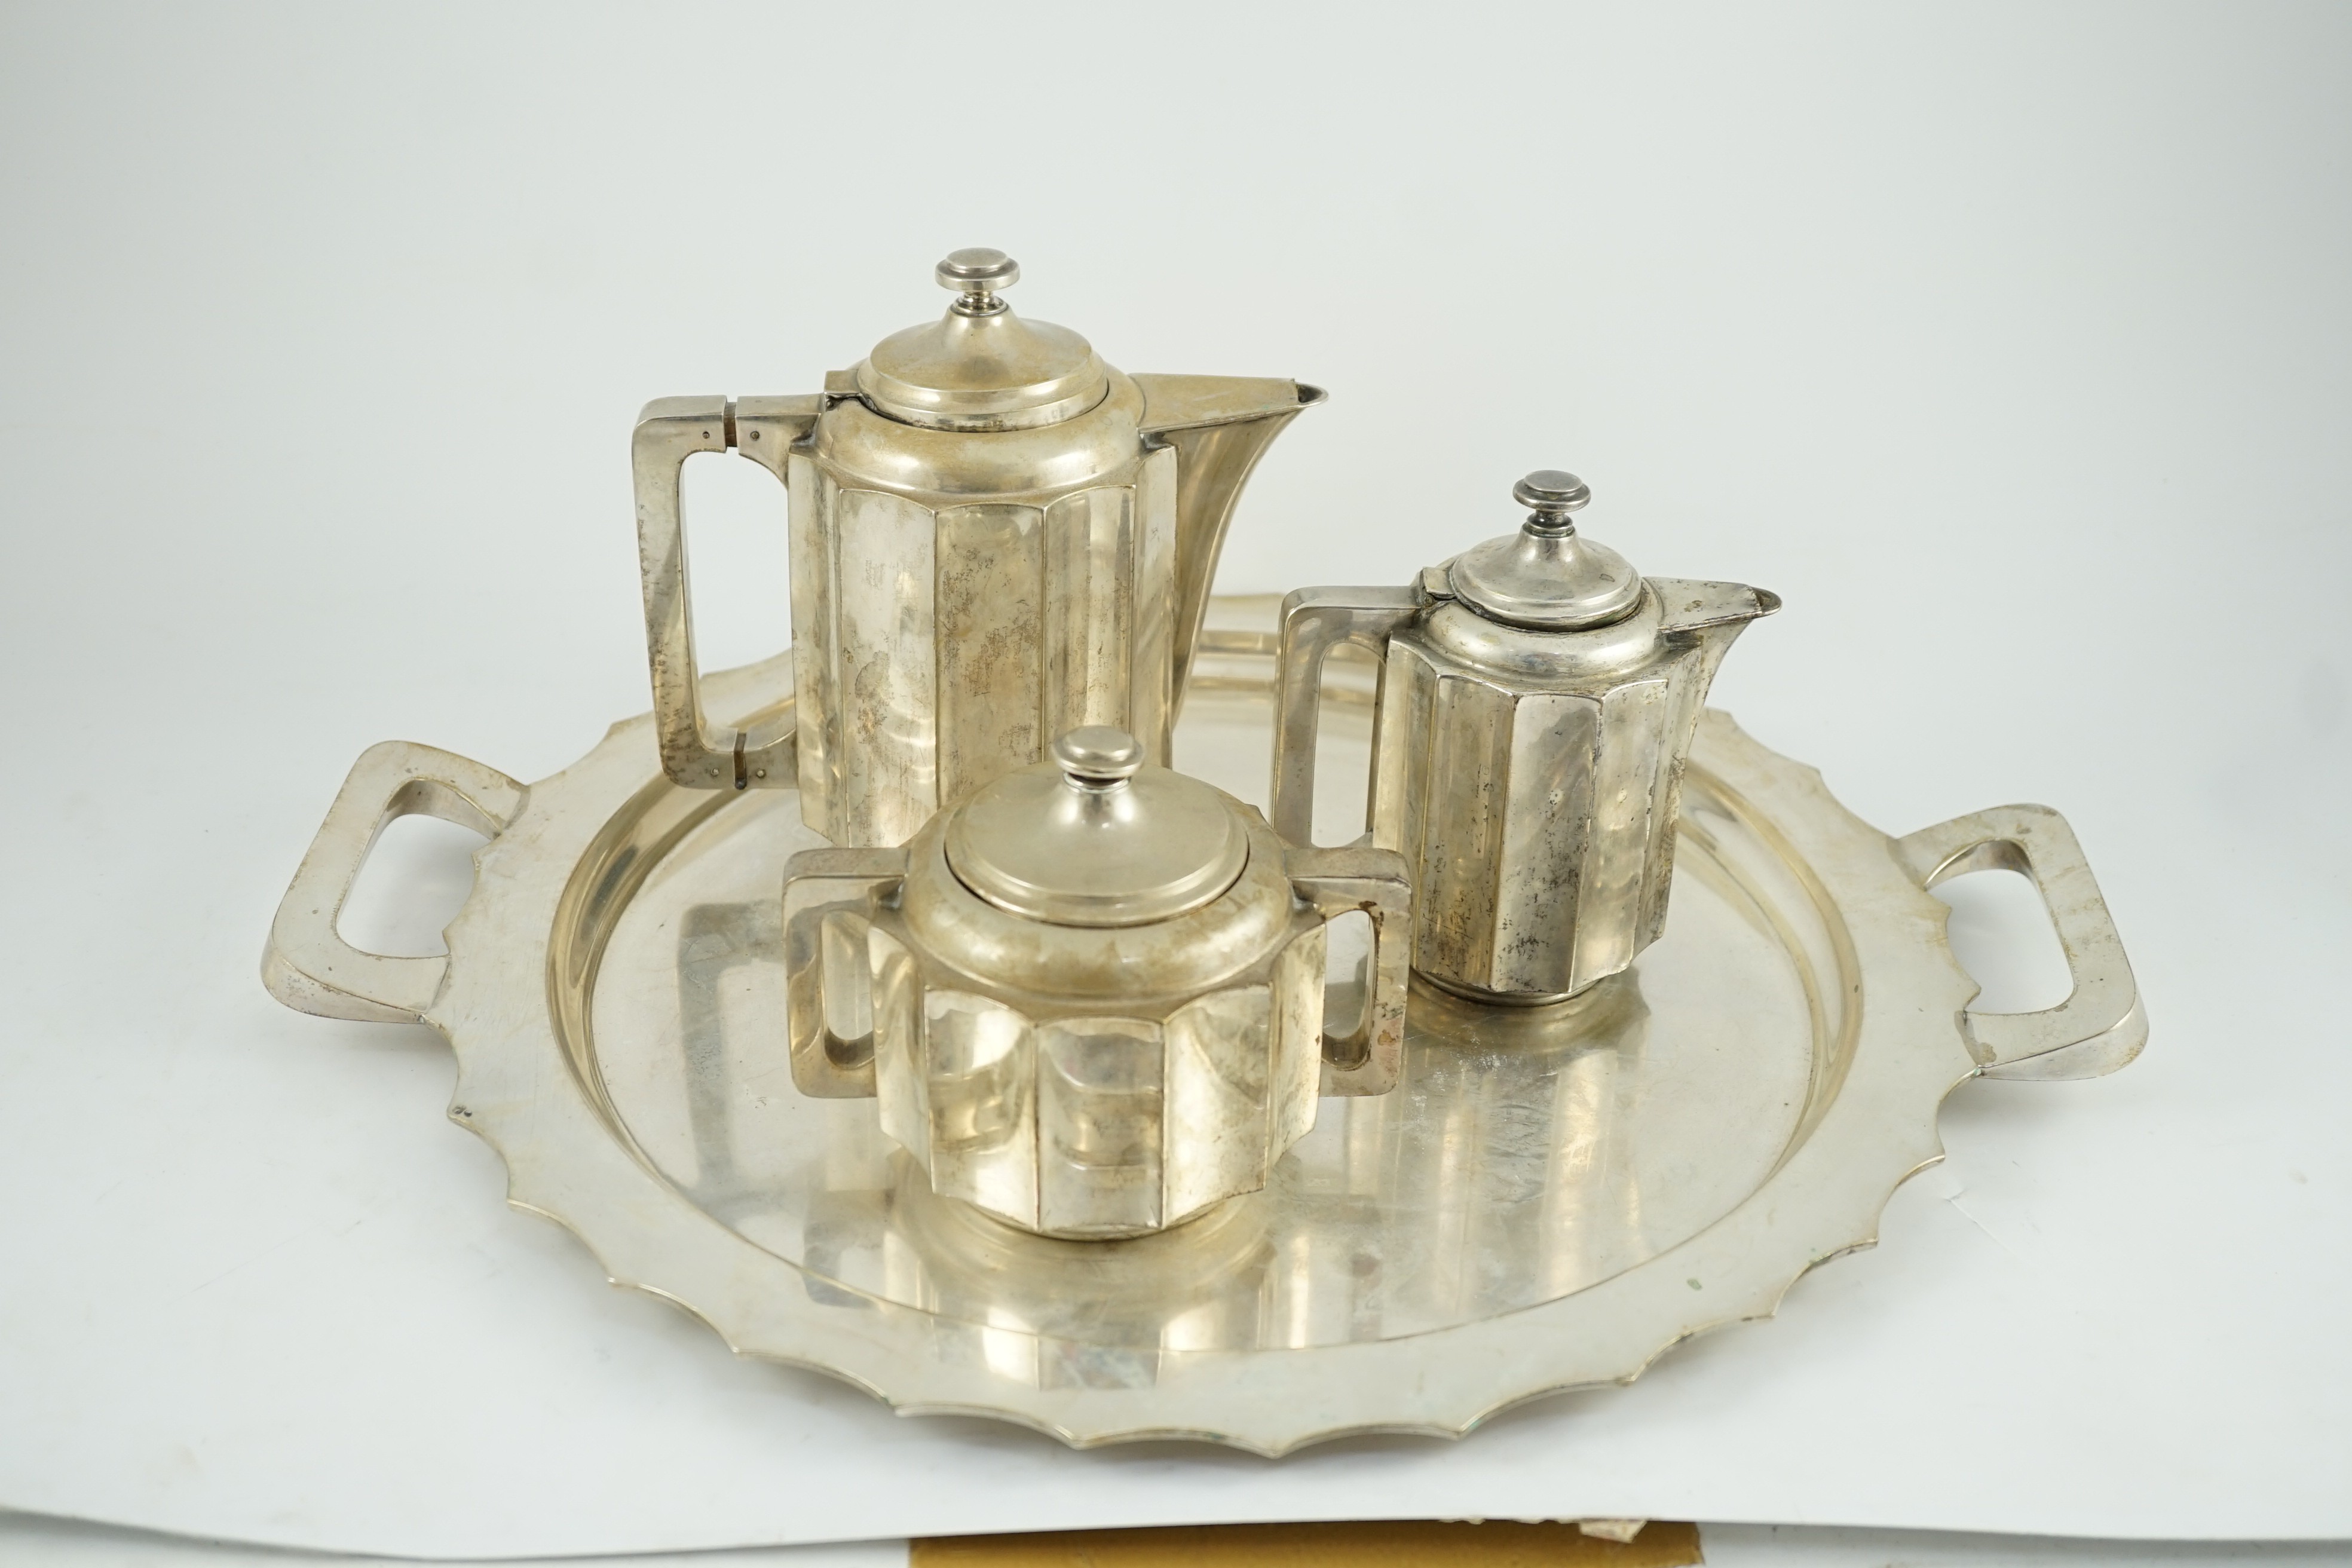 A 20th century Portuguese Art Deco three piece 833 standard silver tea set with two handled tea tray